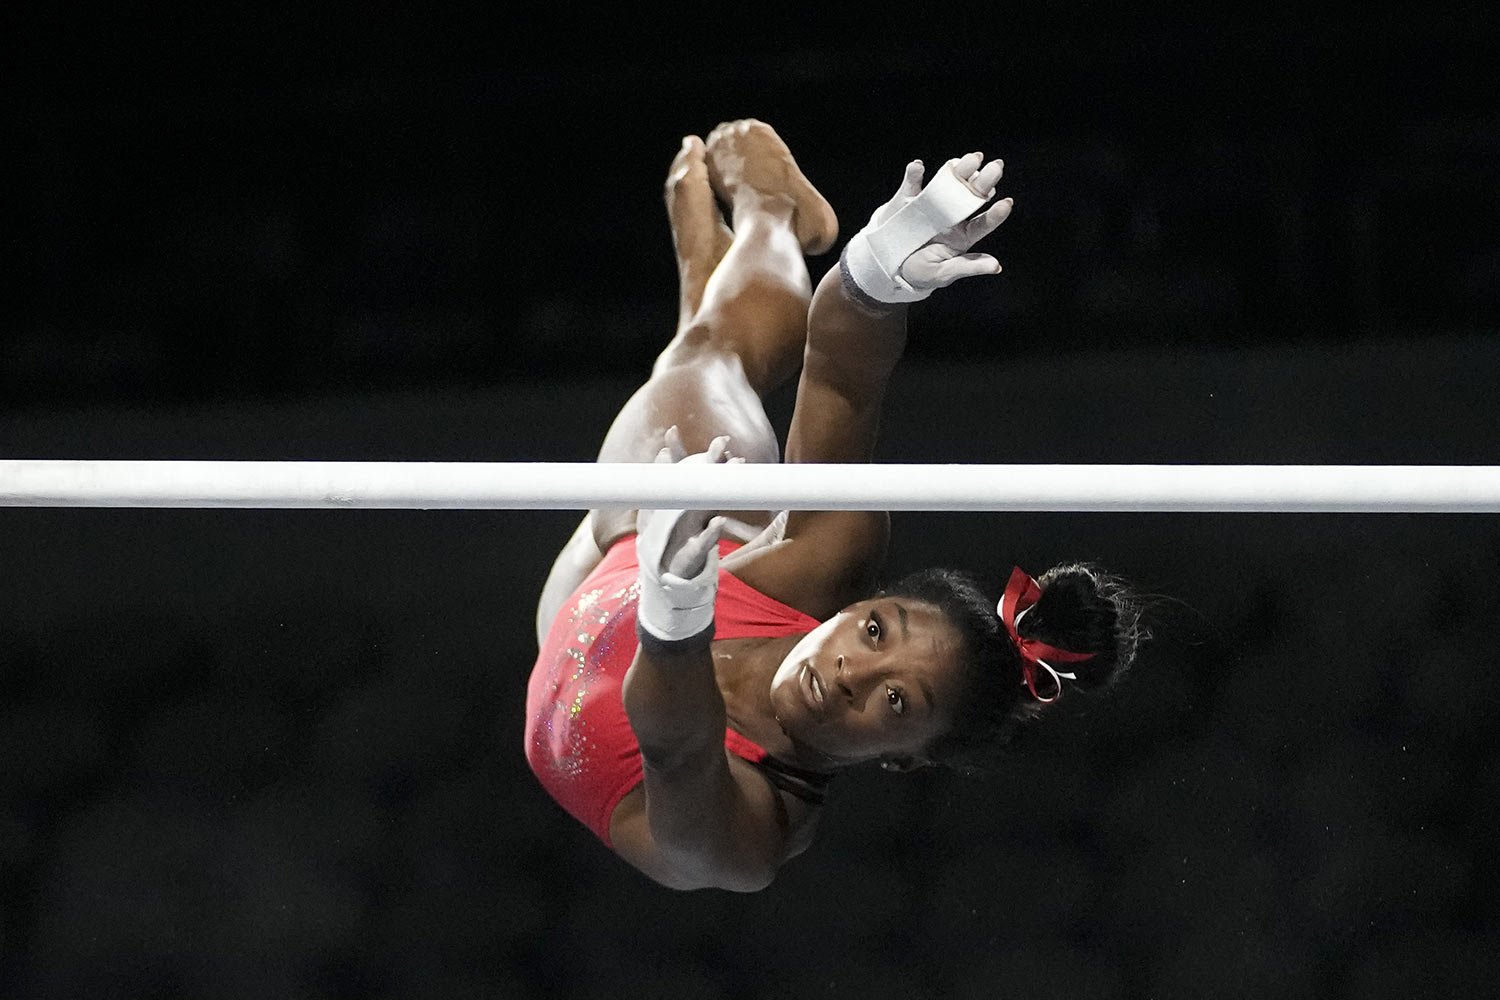  Simone Biles practices on the uneven bars at the U.S. Classic gymnastics competition, in Hoffman Estates, Ill., Aug. 4, 2023. (AP Photo/Morry Gash) 